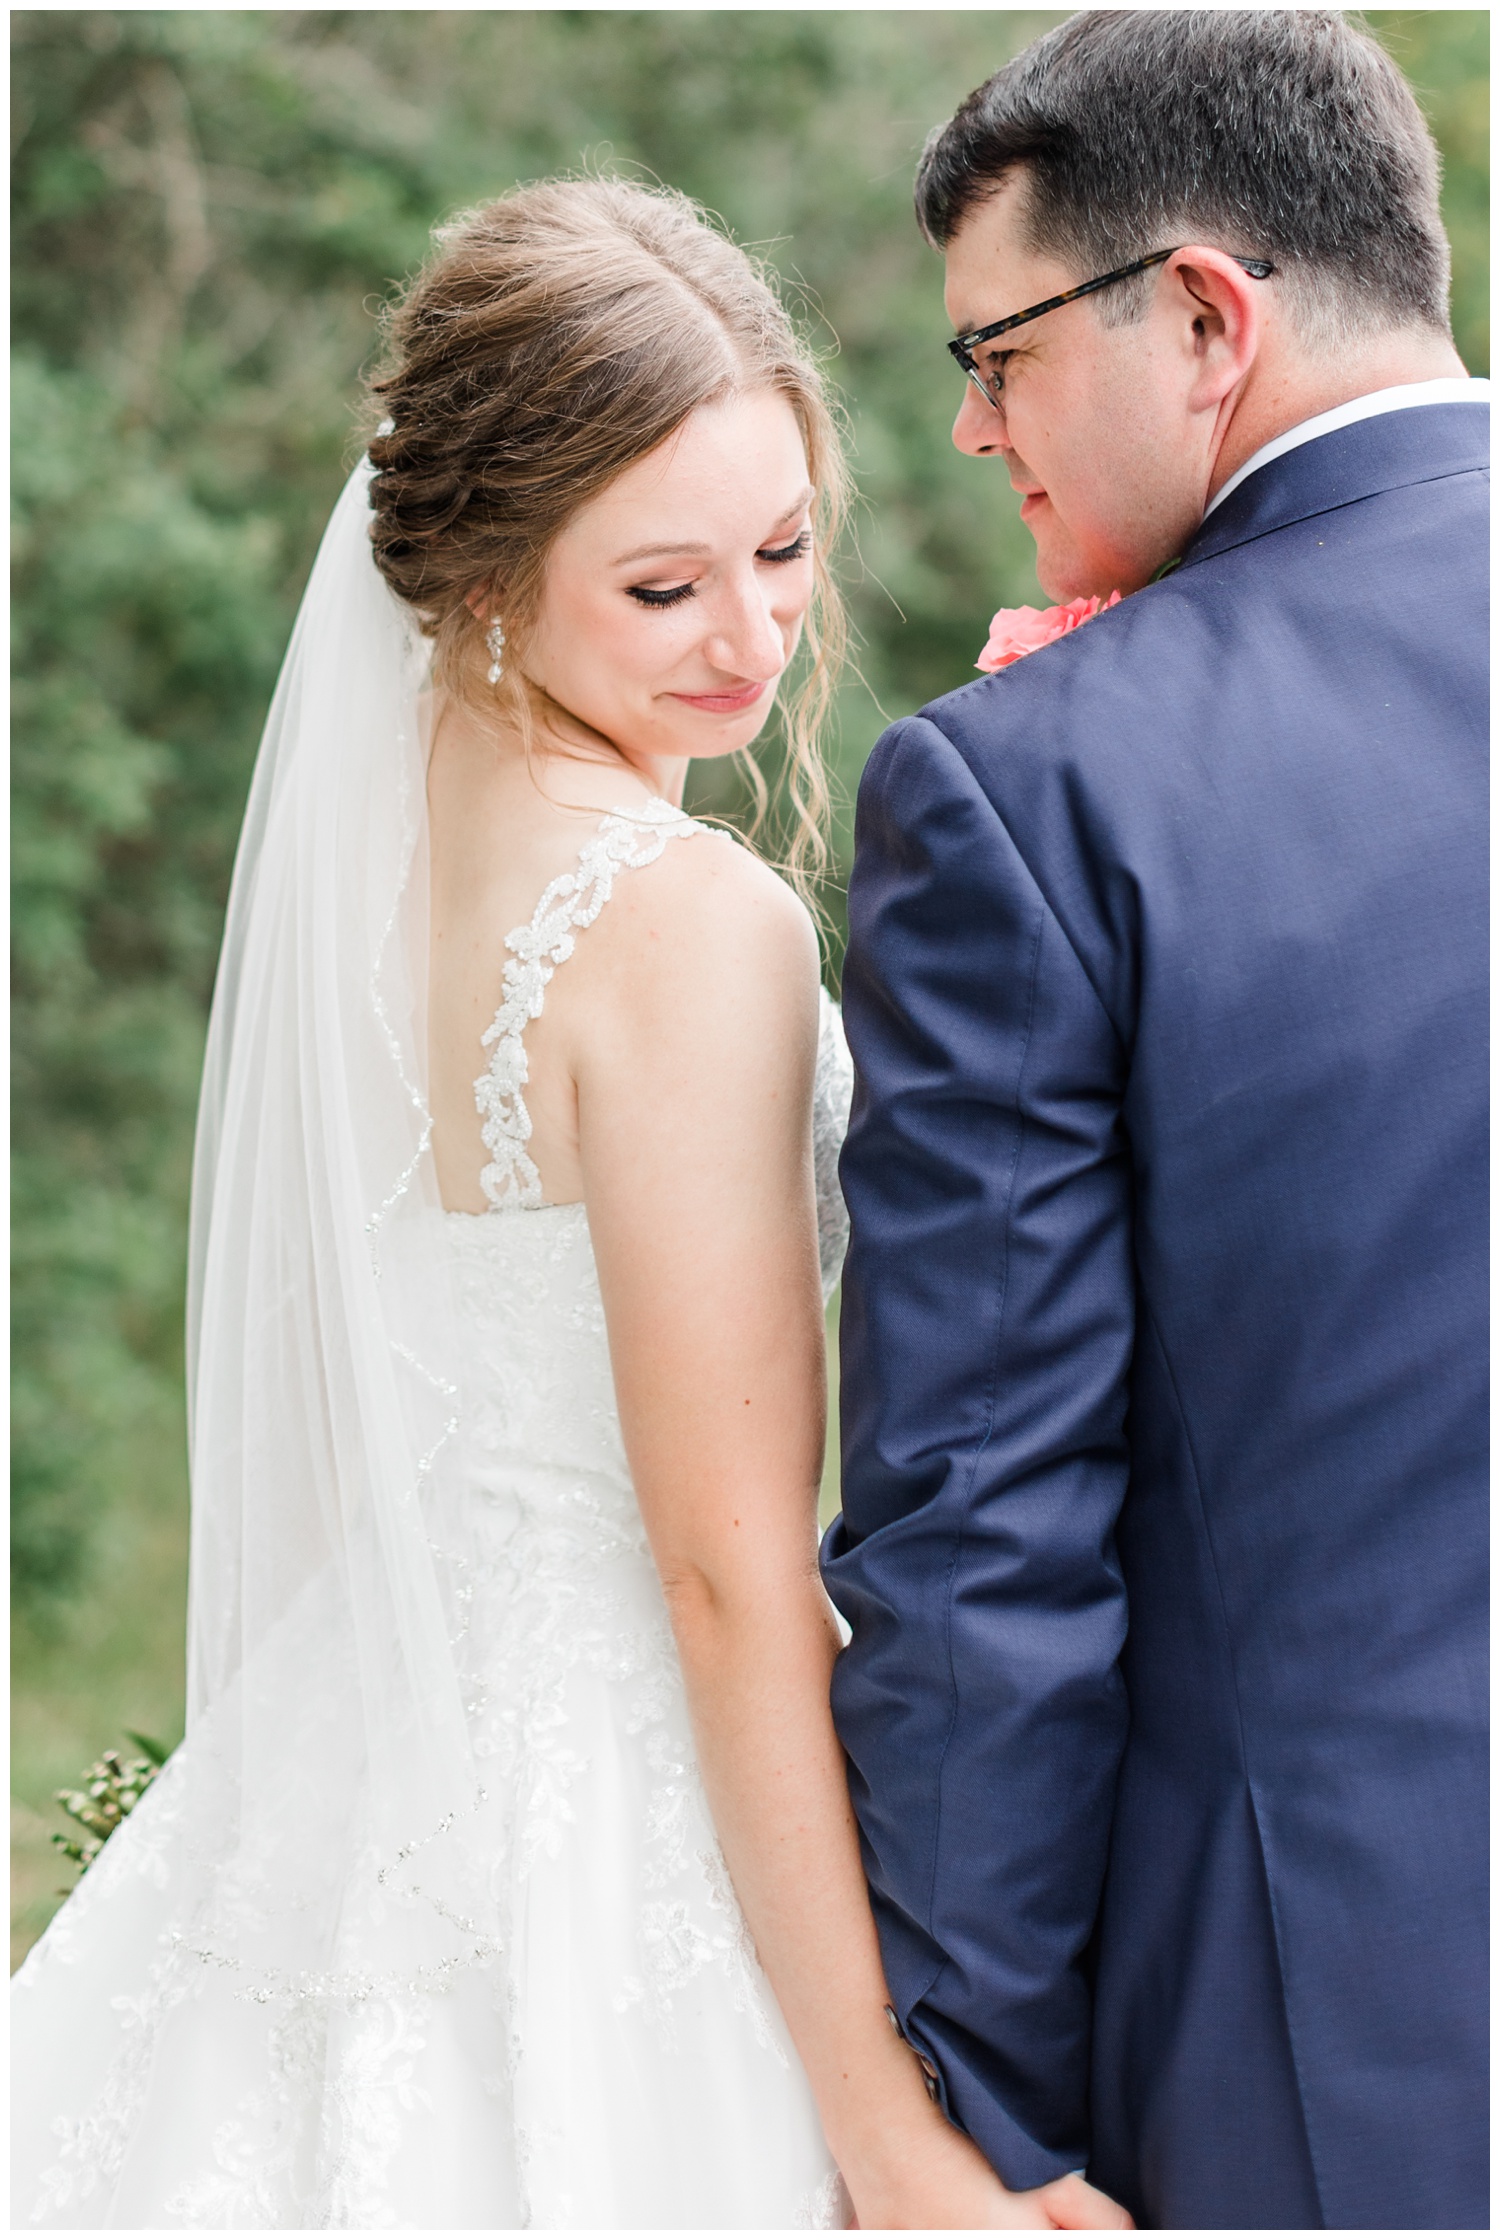 Joe looks down on his bride as they walk hand in hand on Leslie's grandparents farm | CB Studio